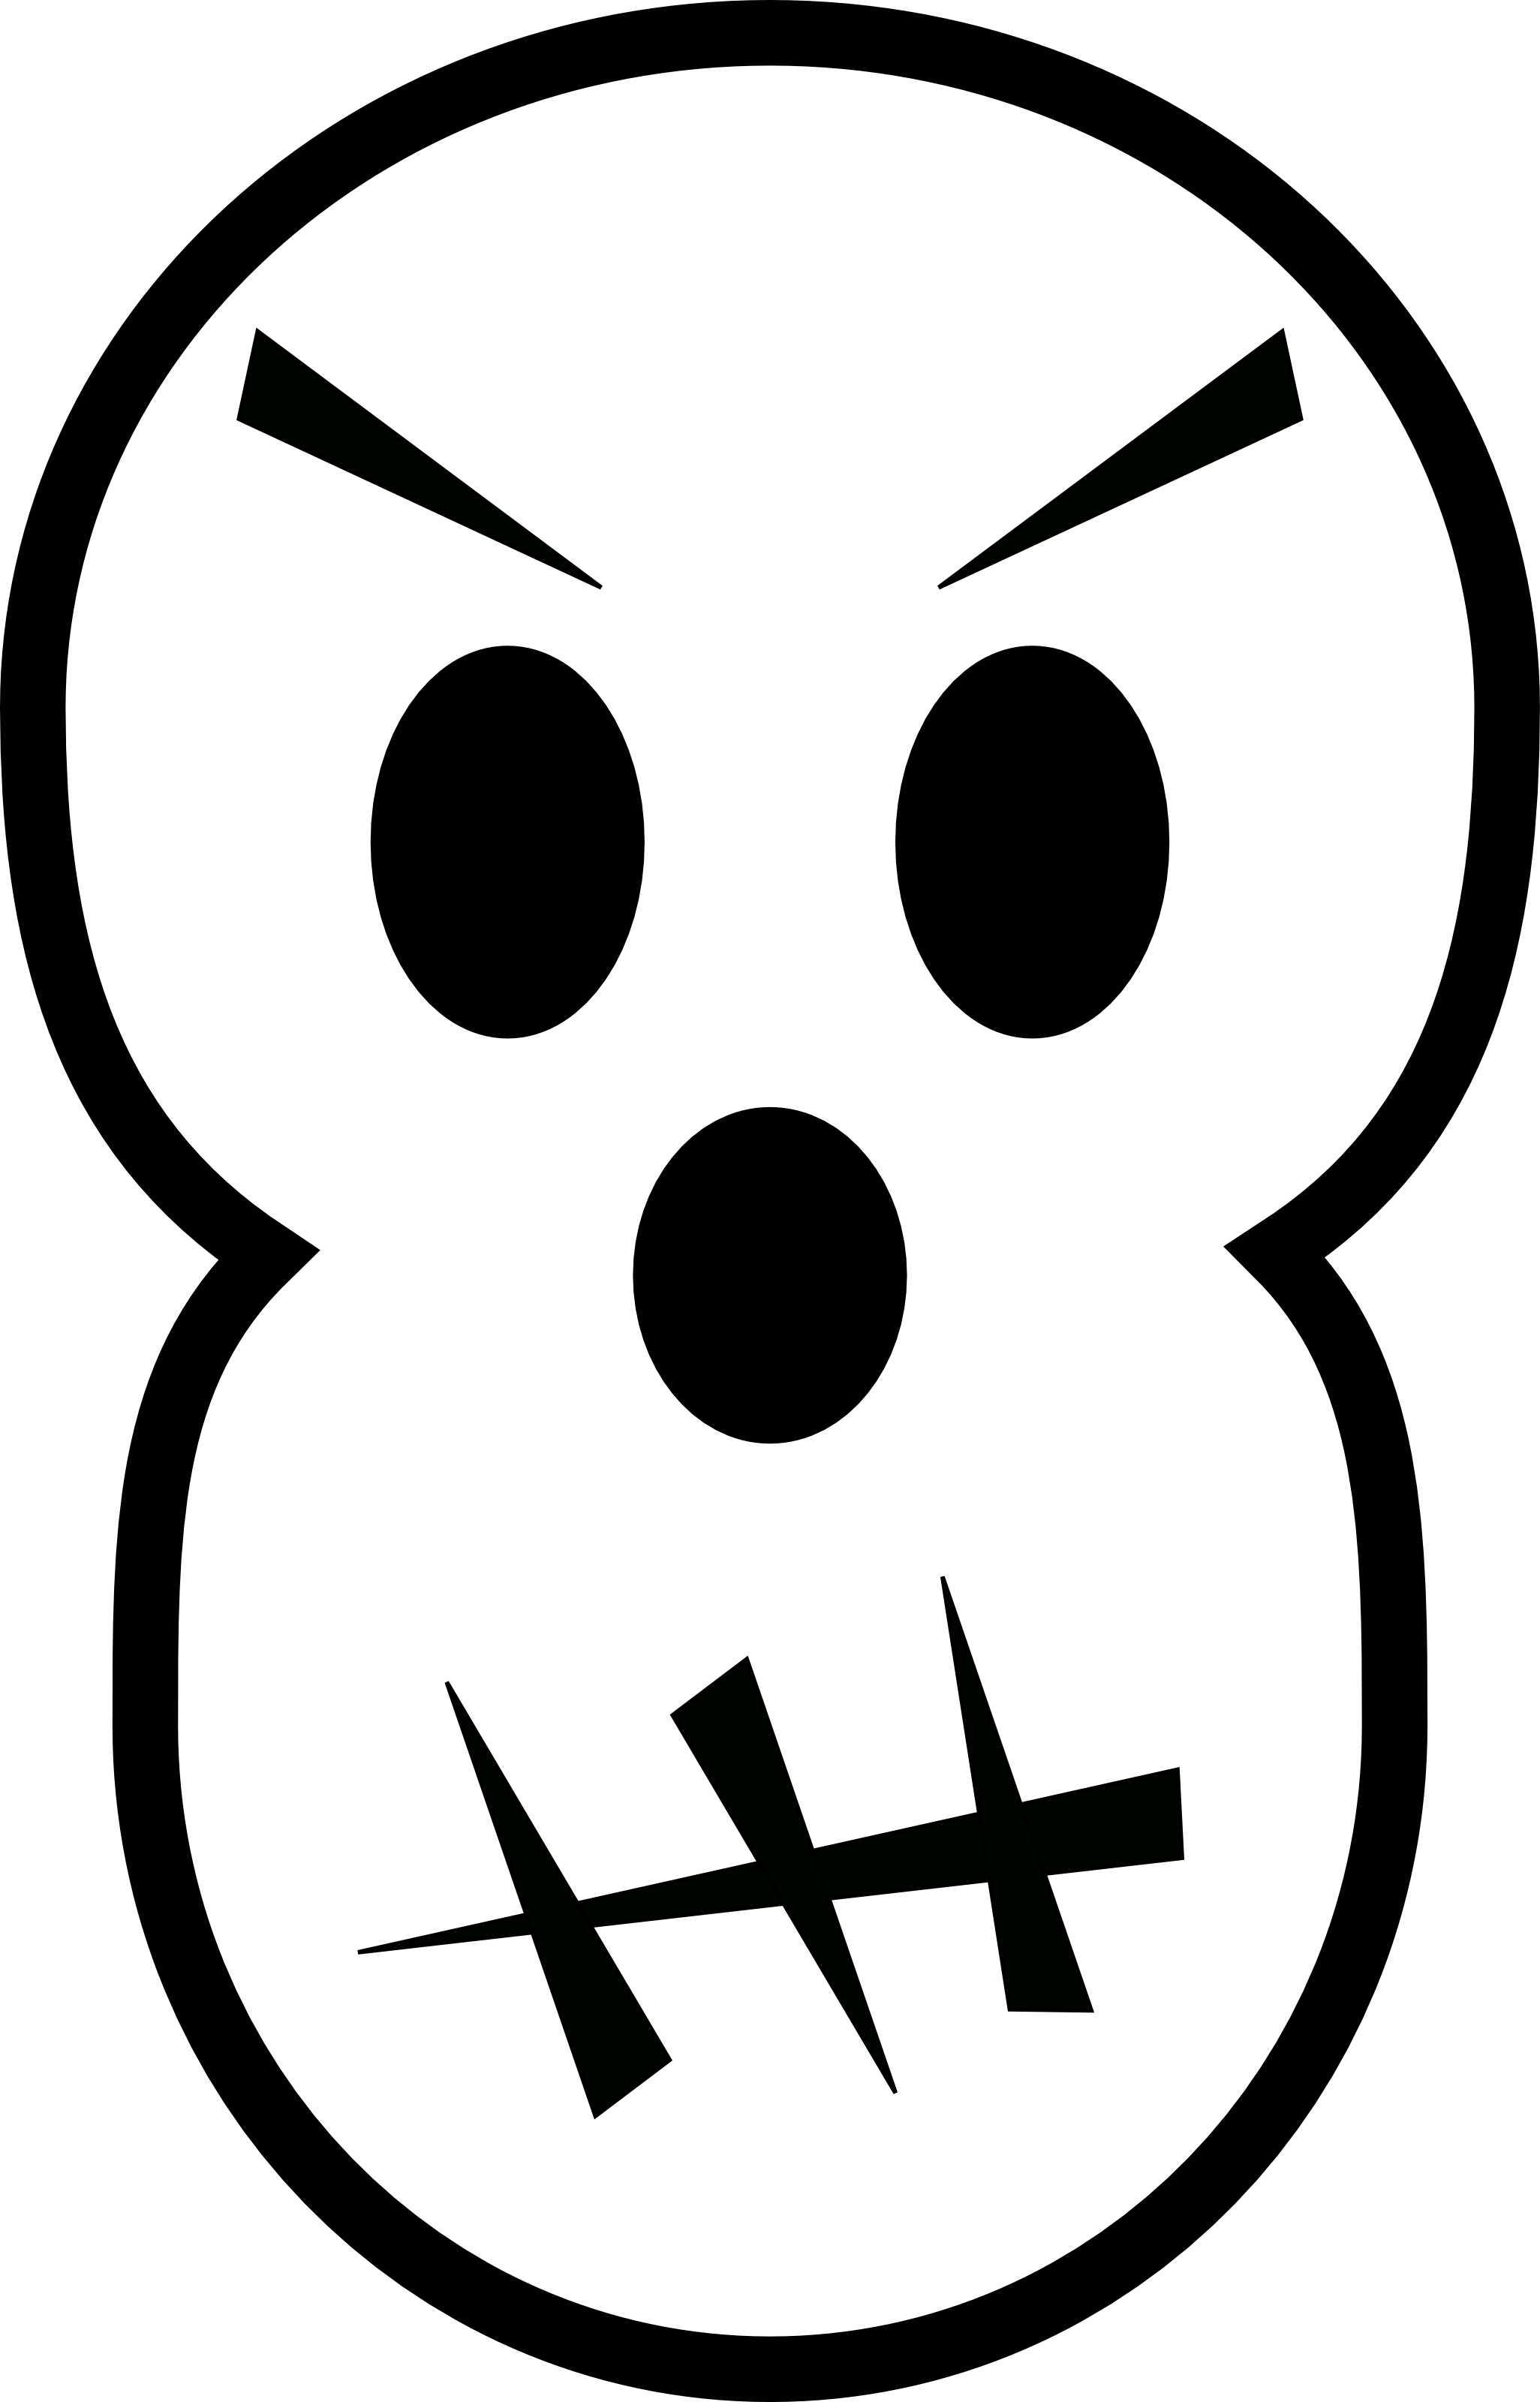 Dog Face Clipart Black And White   Clipart Panda   Free Clipart Images